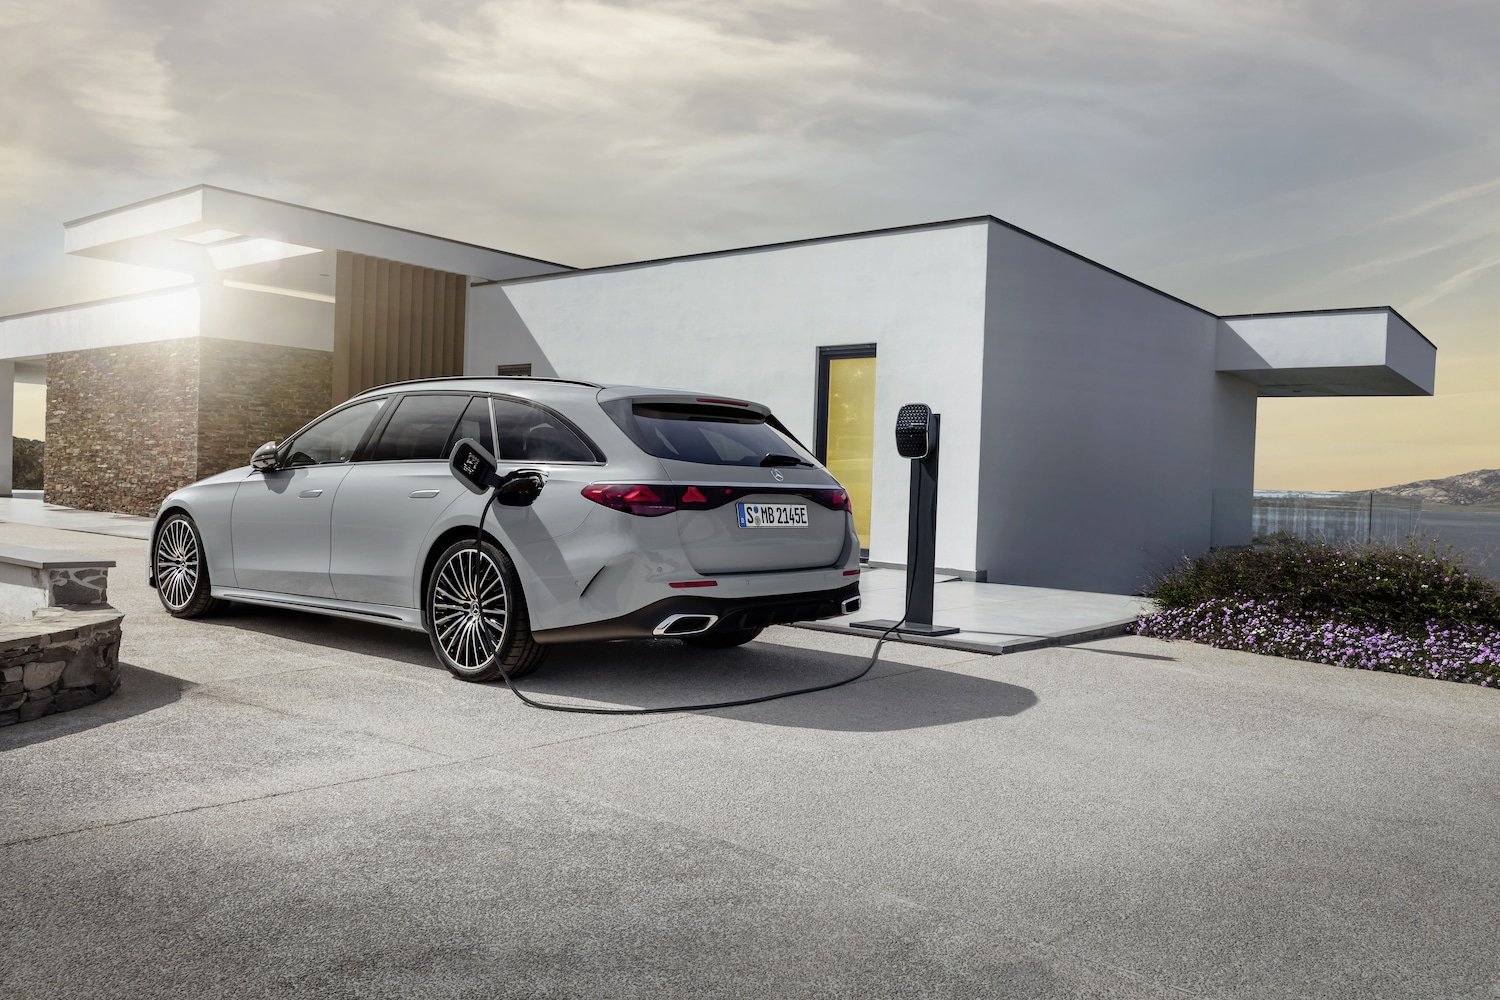 Should plug-in hybrid cars be banned in Europe?